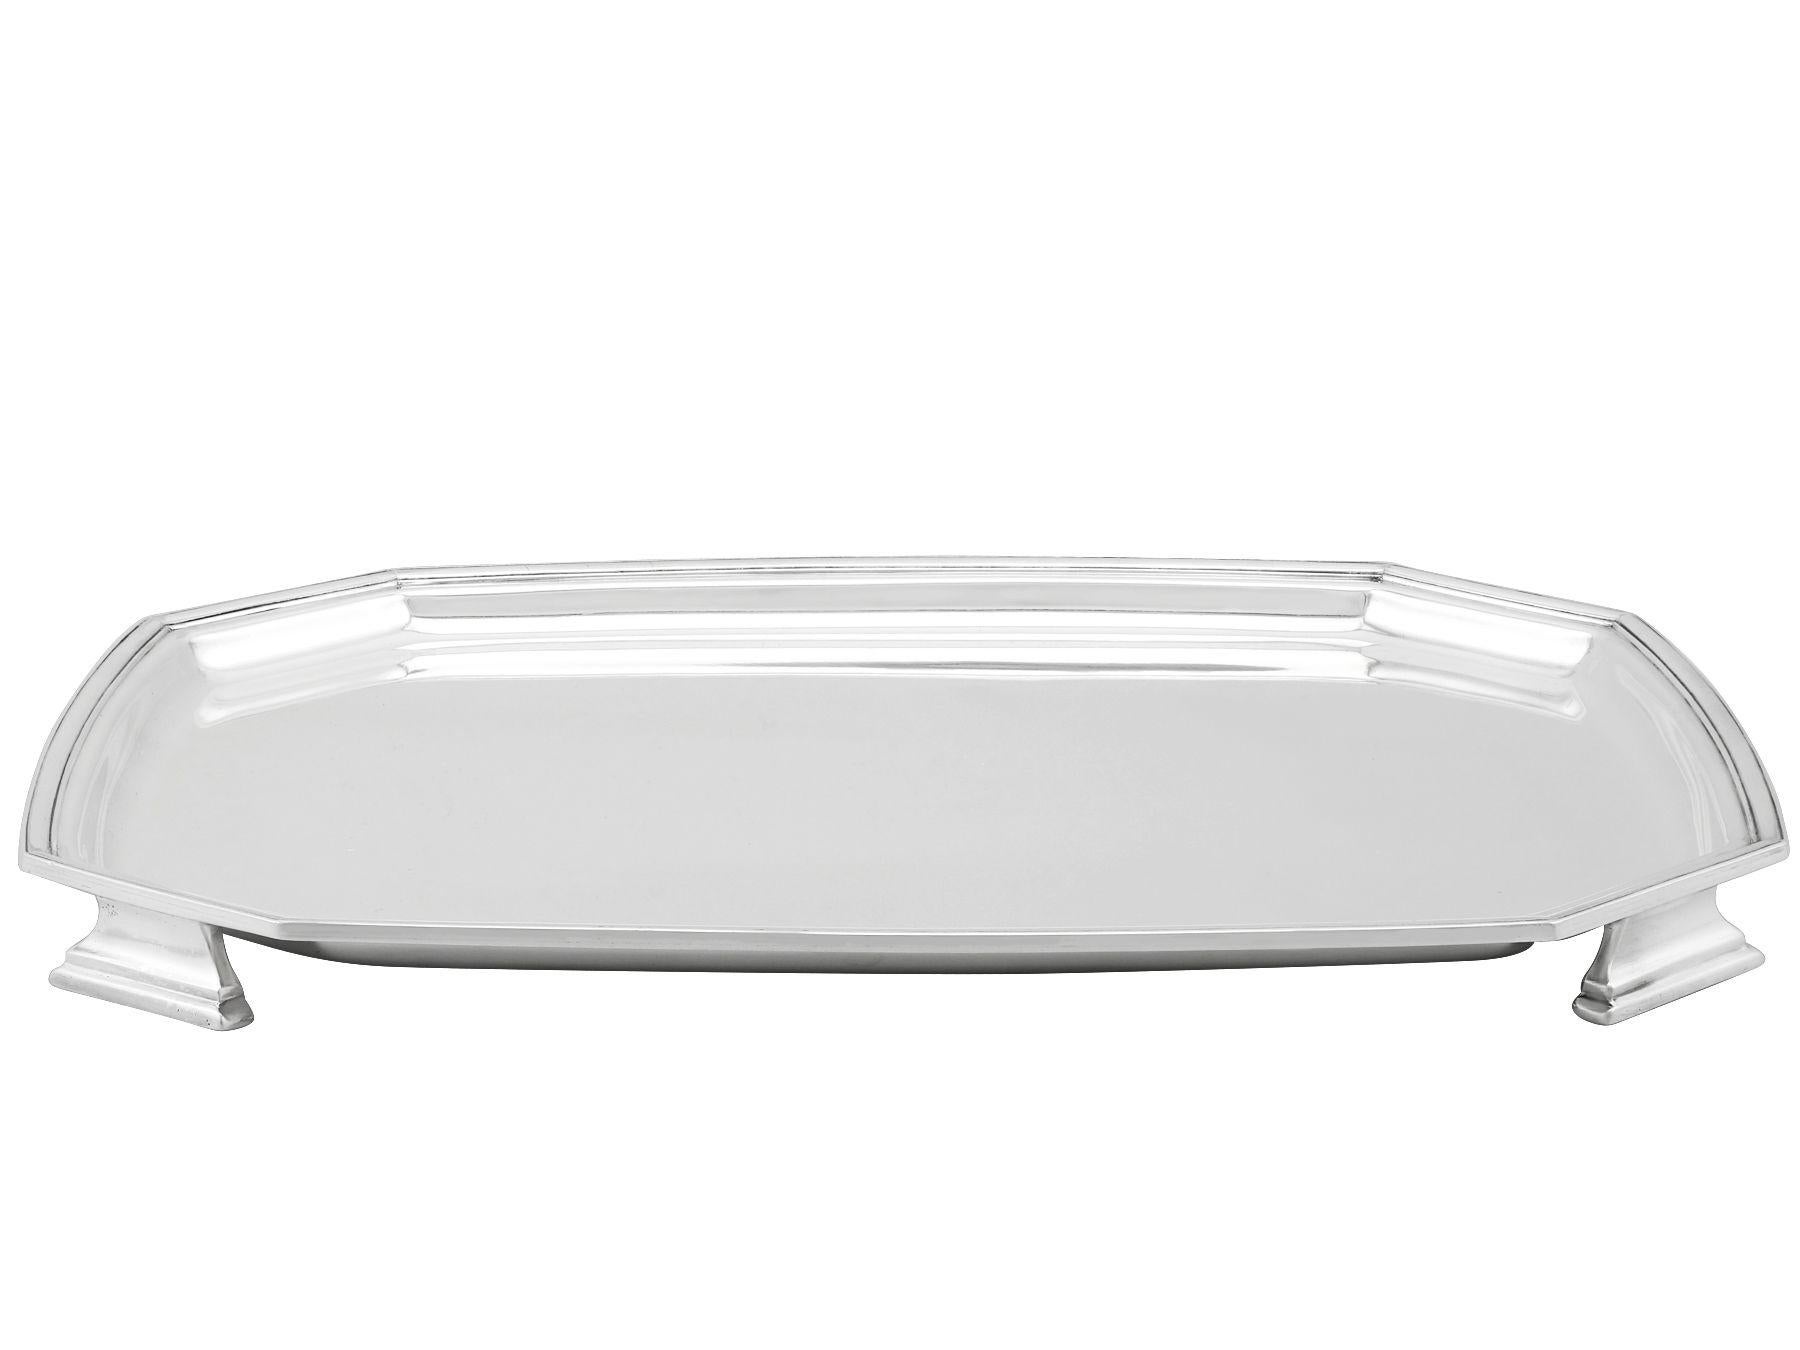 An exceptional, fine and impressive, vintage George VI English sterling silver salver; an addition to our silver dining collection.

This exceptional vintage George VI English sterling silver salver has a rectangular cut cornered form, all in the